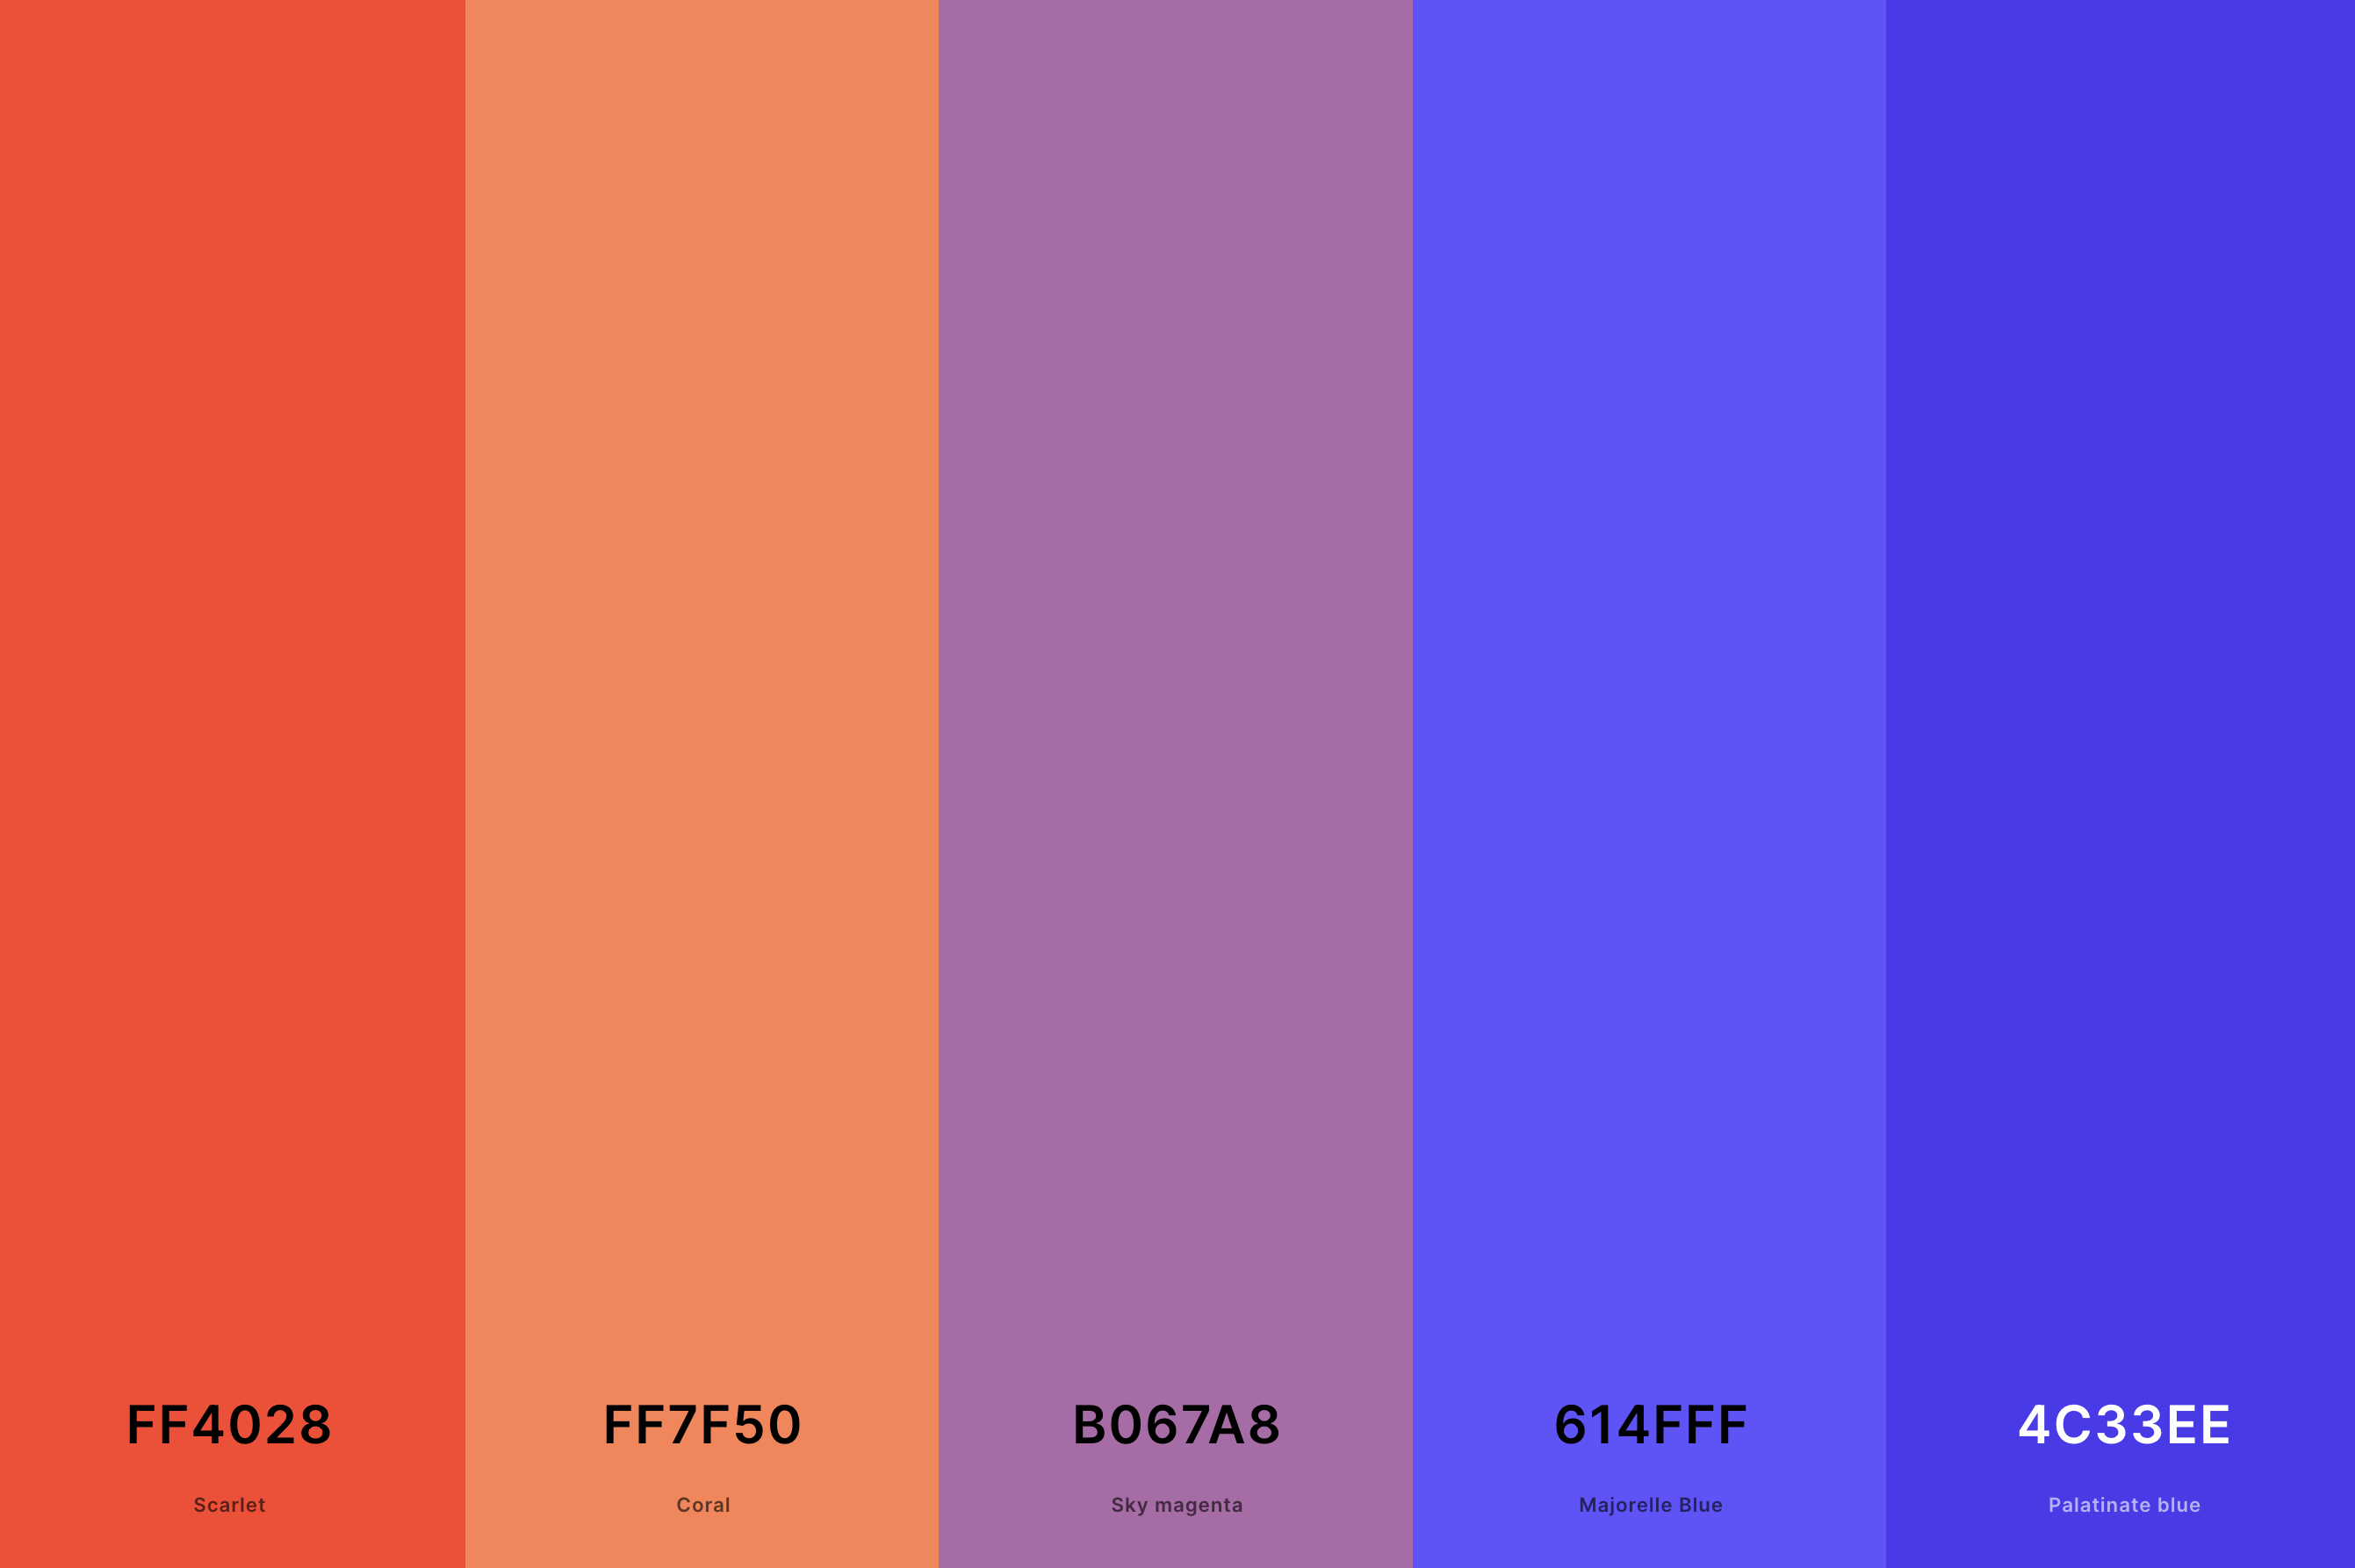 5. Coral And Blue Color Palette Color Palette with Scarlet (Hex #FF4028) + Coral (Hex #FF7F50) + Sky Magenta (Hex #B067A8) + Majorelle Blue (Hex #614FFF) + Palatinate Blue (Hex #4C33EE) Color Palette with Hex Codes